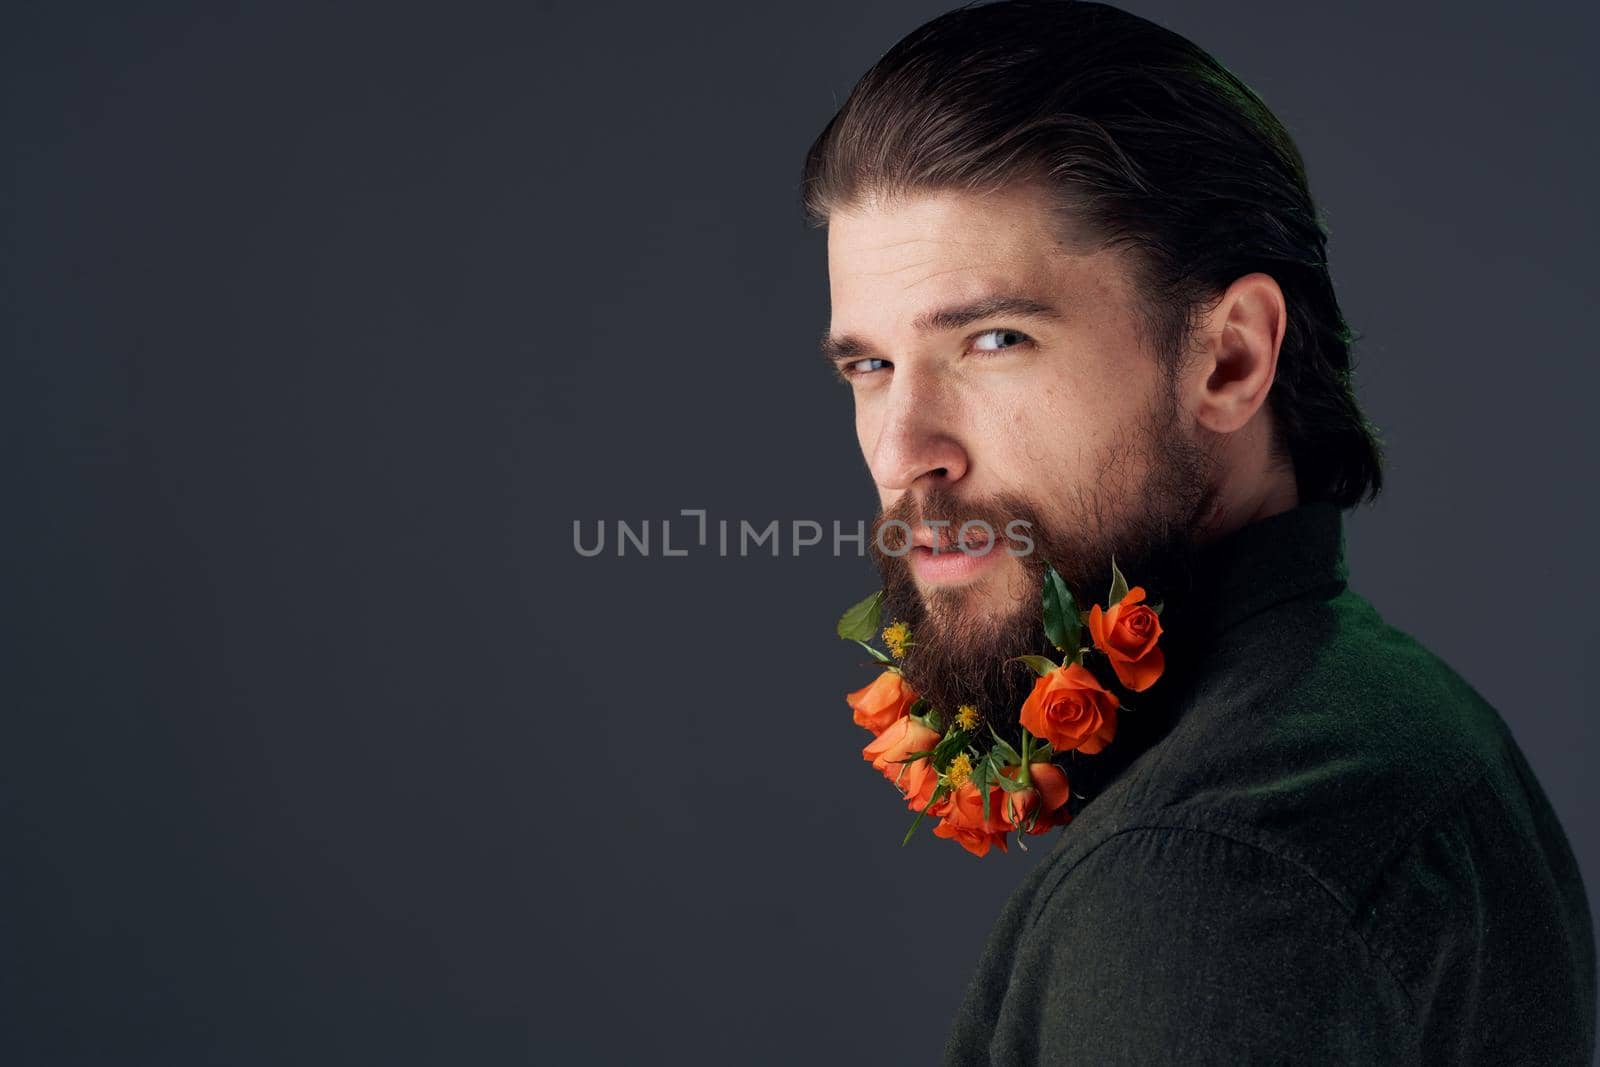 Cute man flowers in beard ornaments elegant style close-up by SHOTPRIME